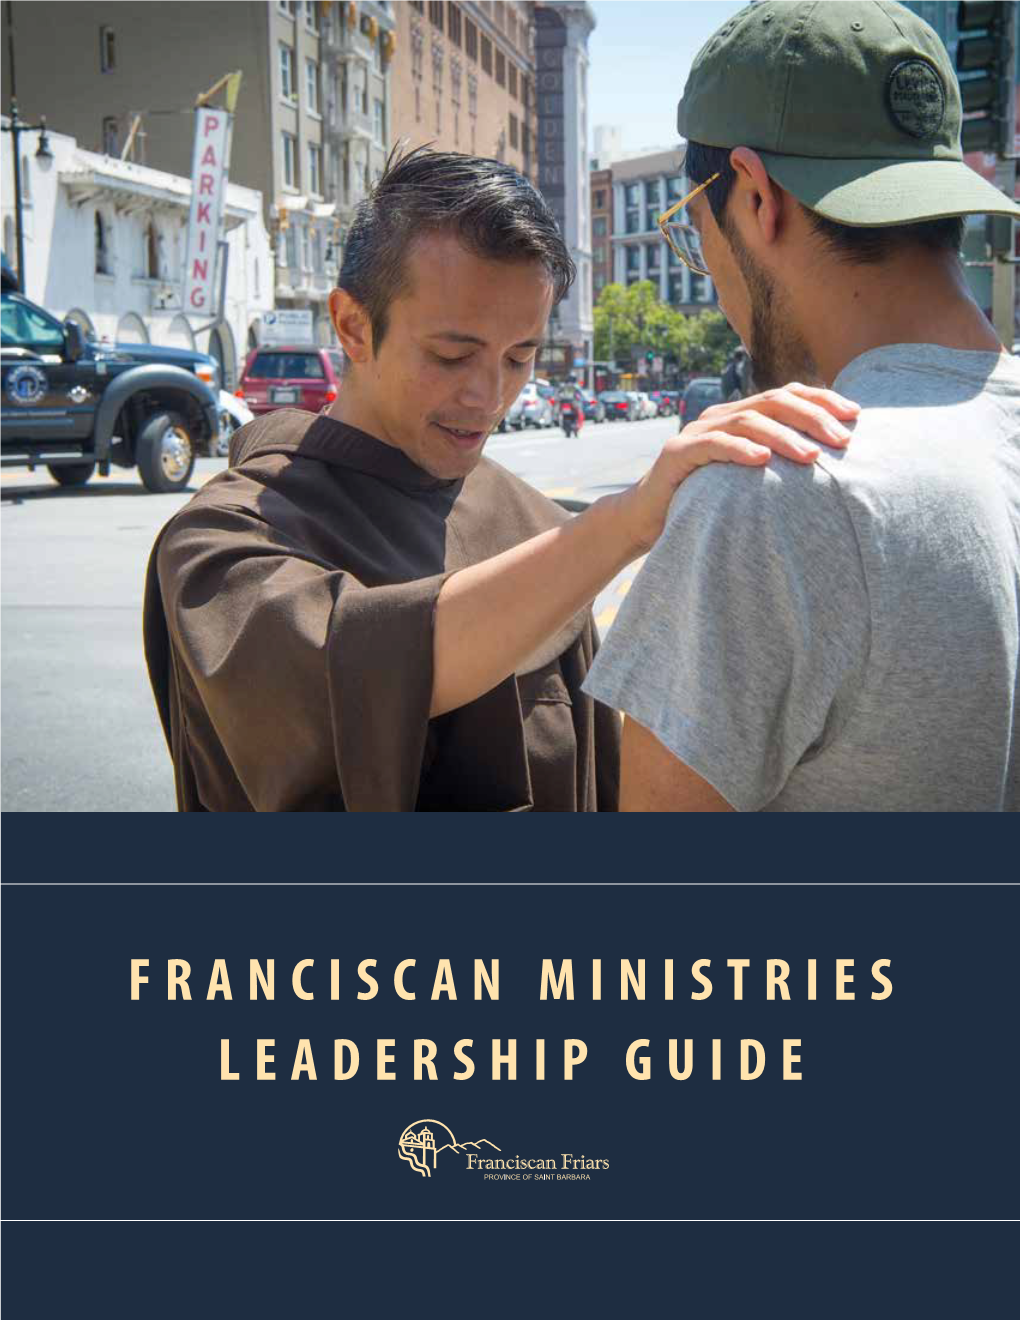 FRANCISCAN MINISTRIES LEADERSHIP GUIDE Contents